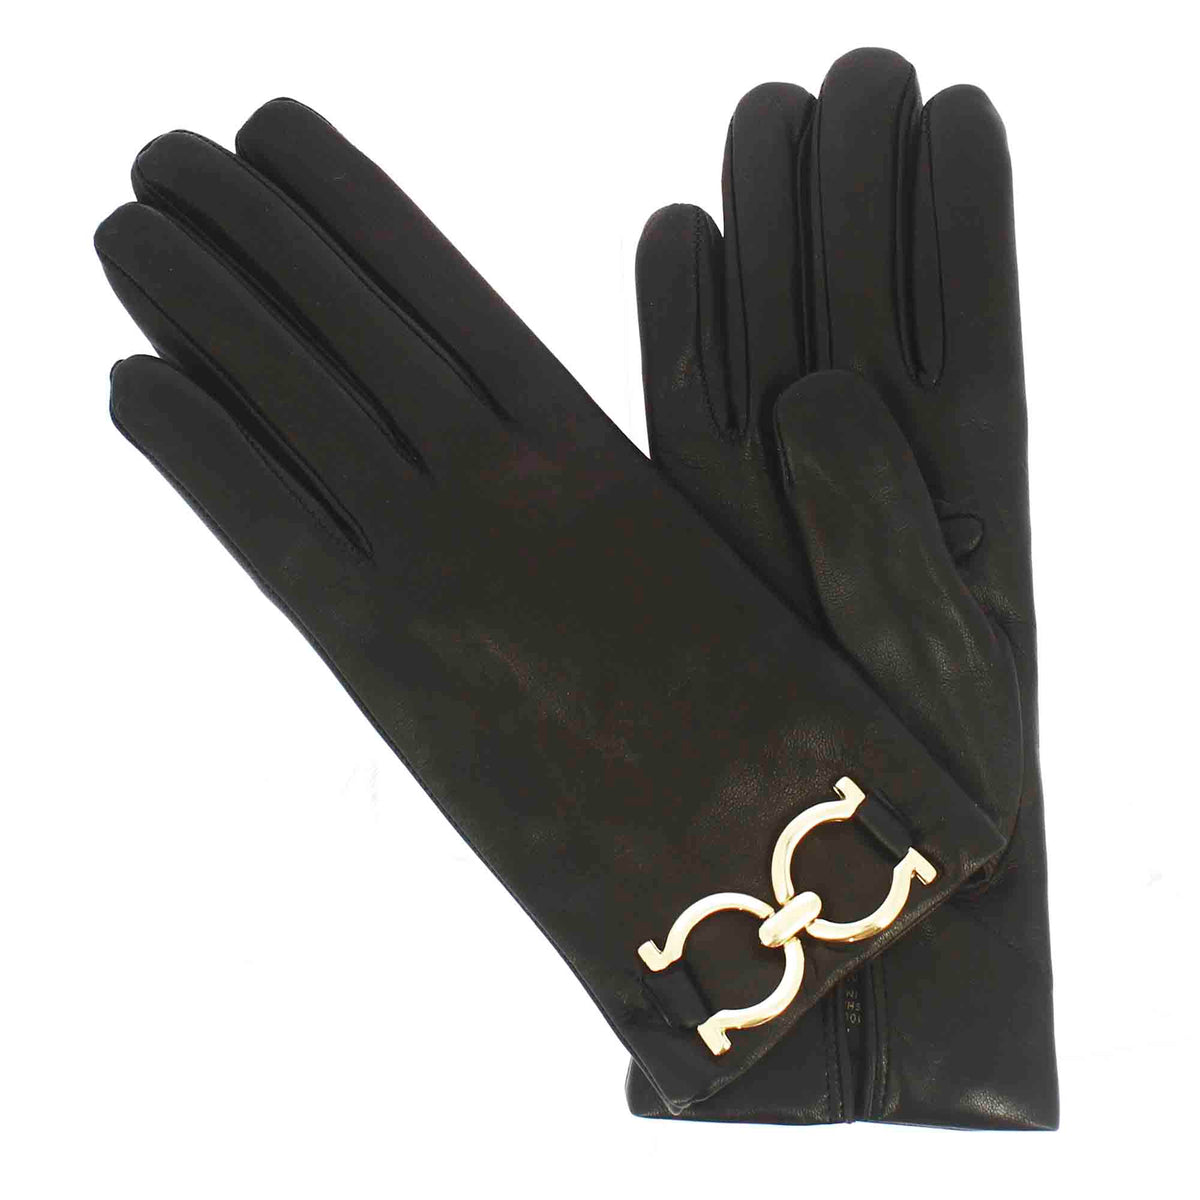 Women's glove in black leather with gold horsebit and cashmere lining